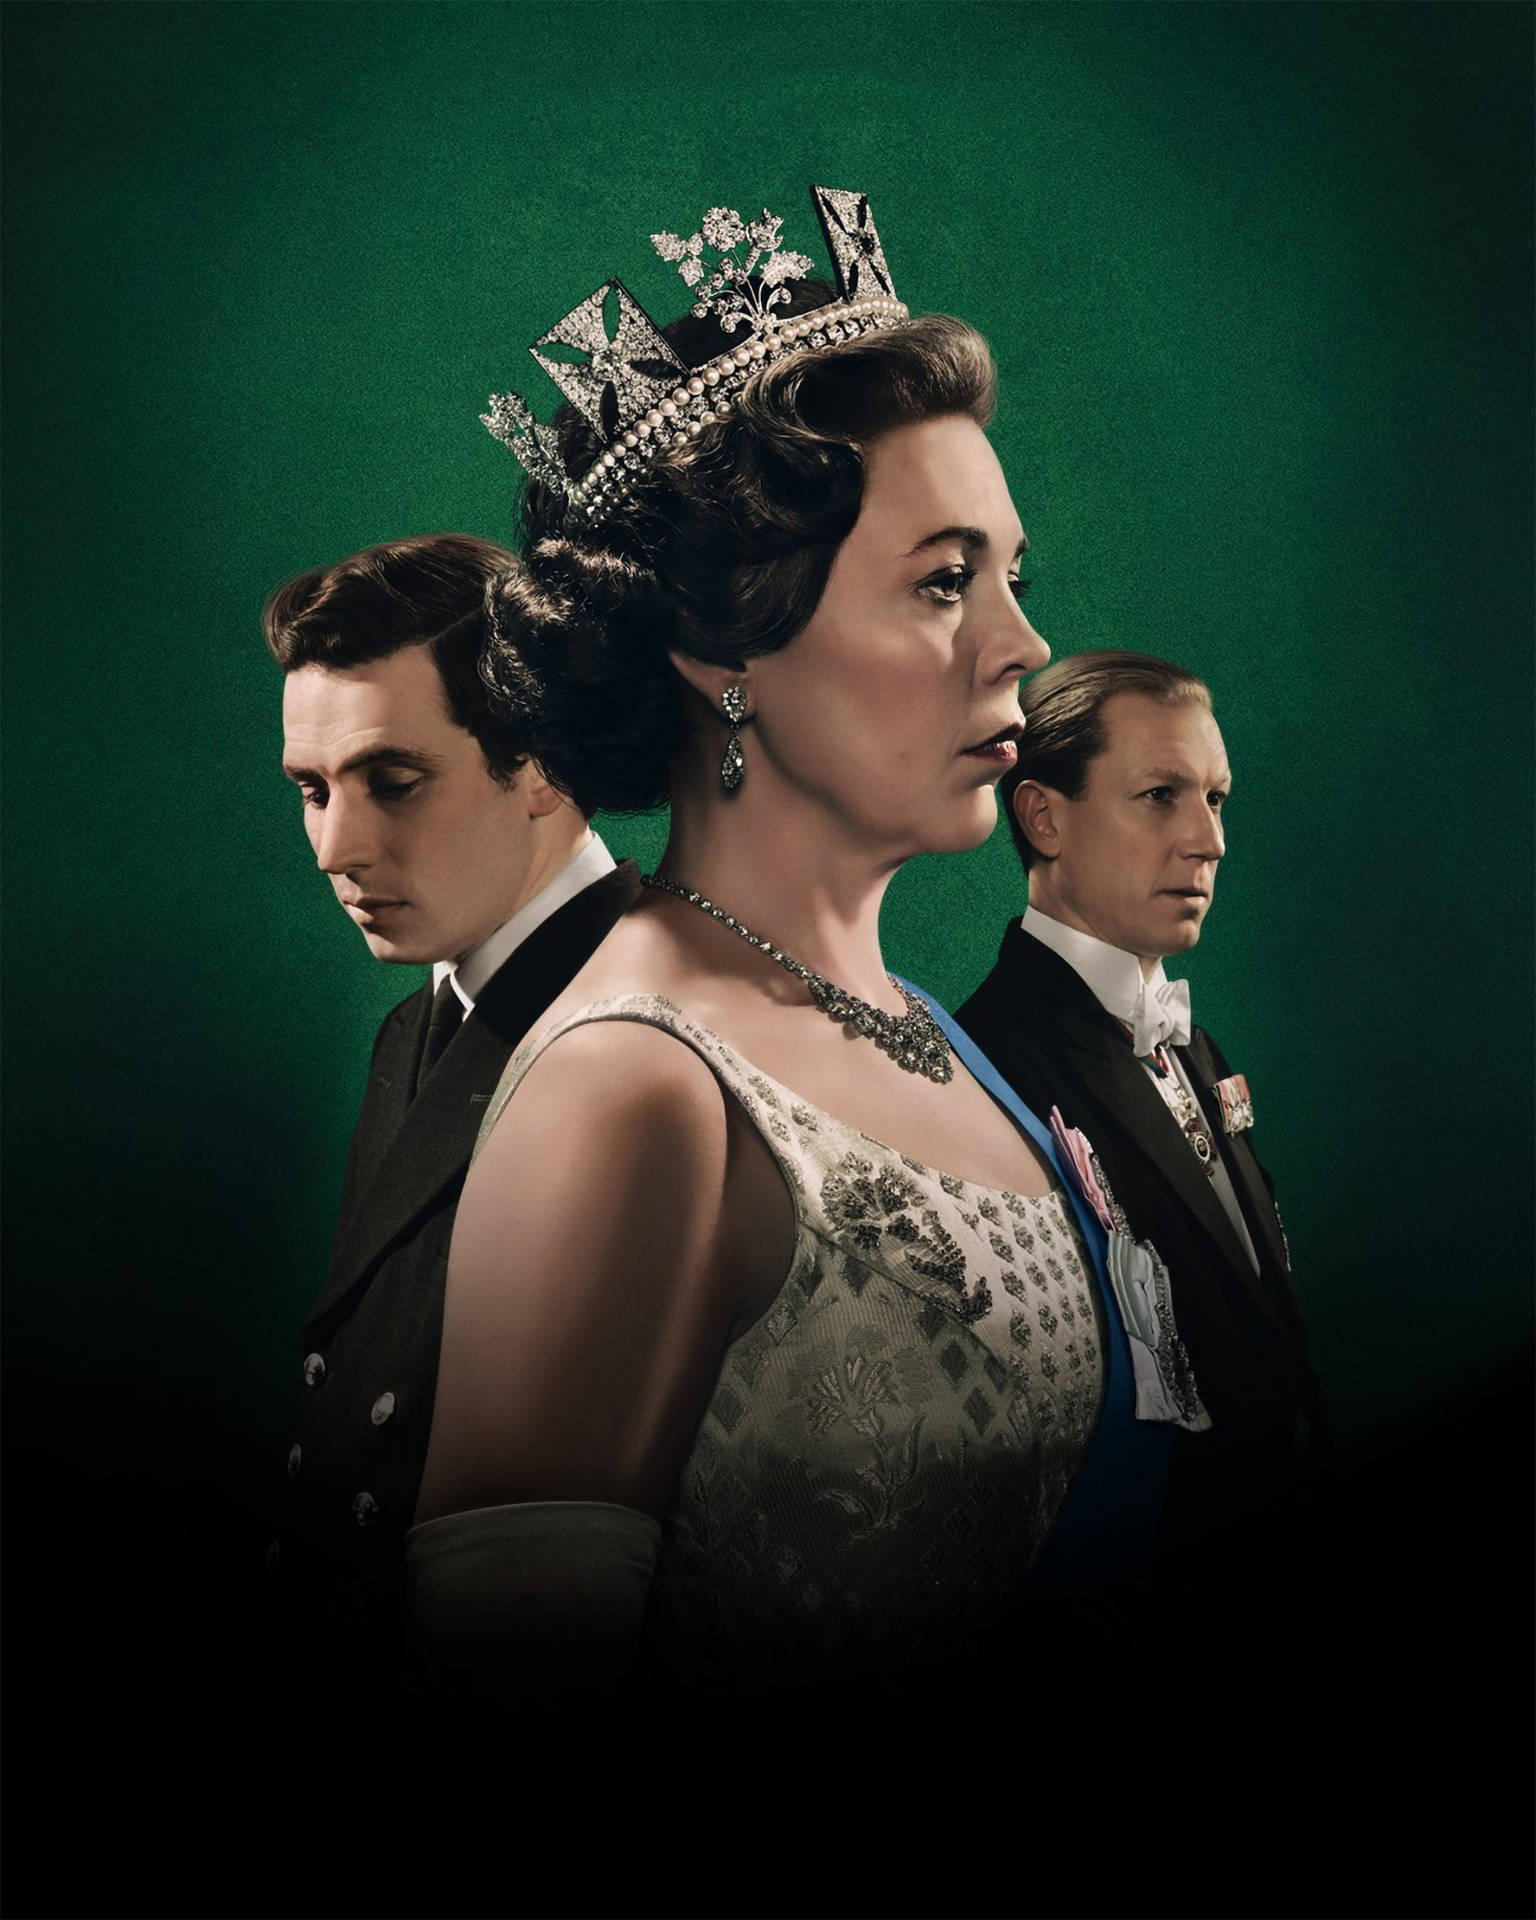 The Crown Green Poster Wallpaper